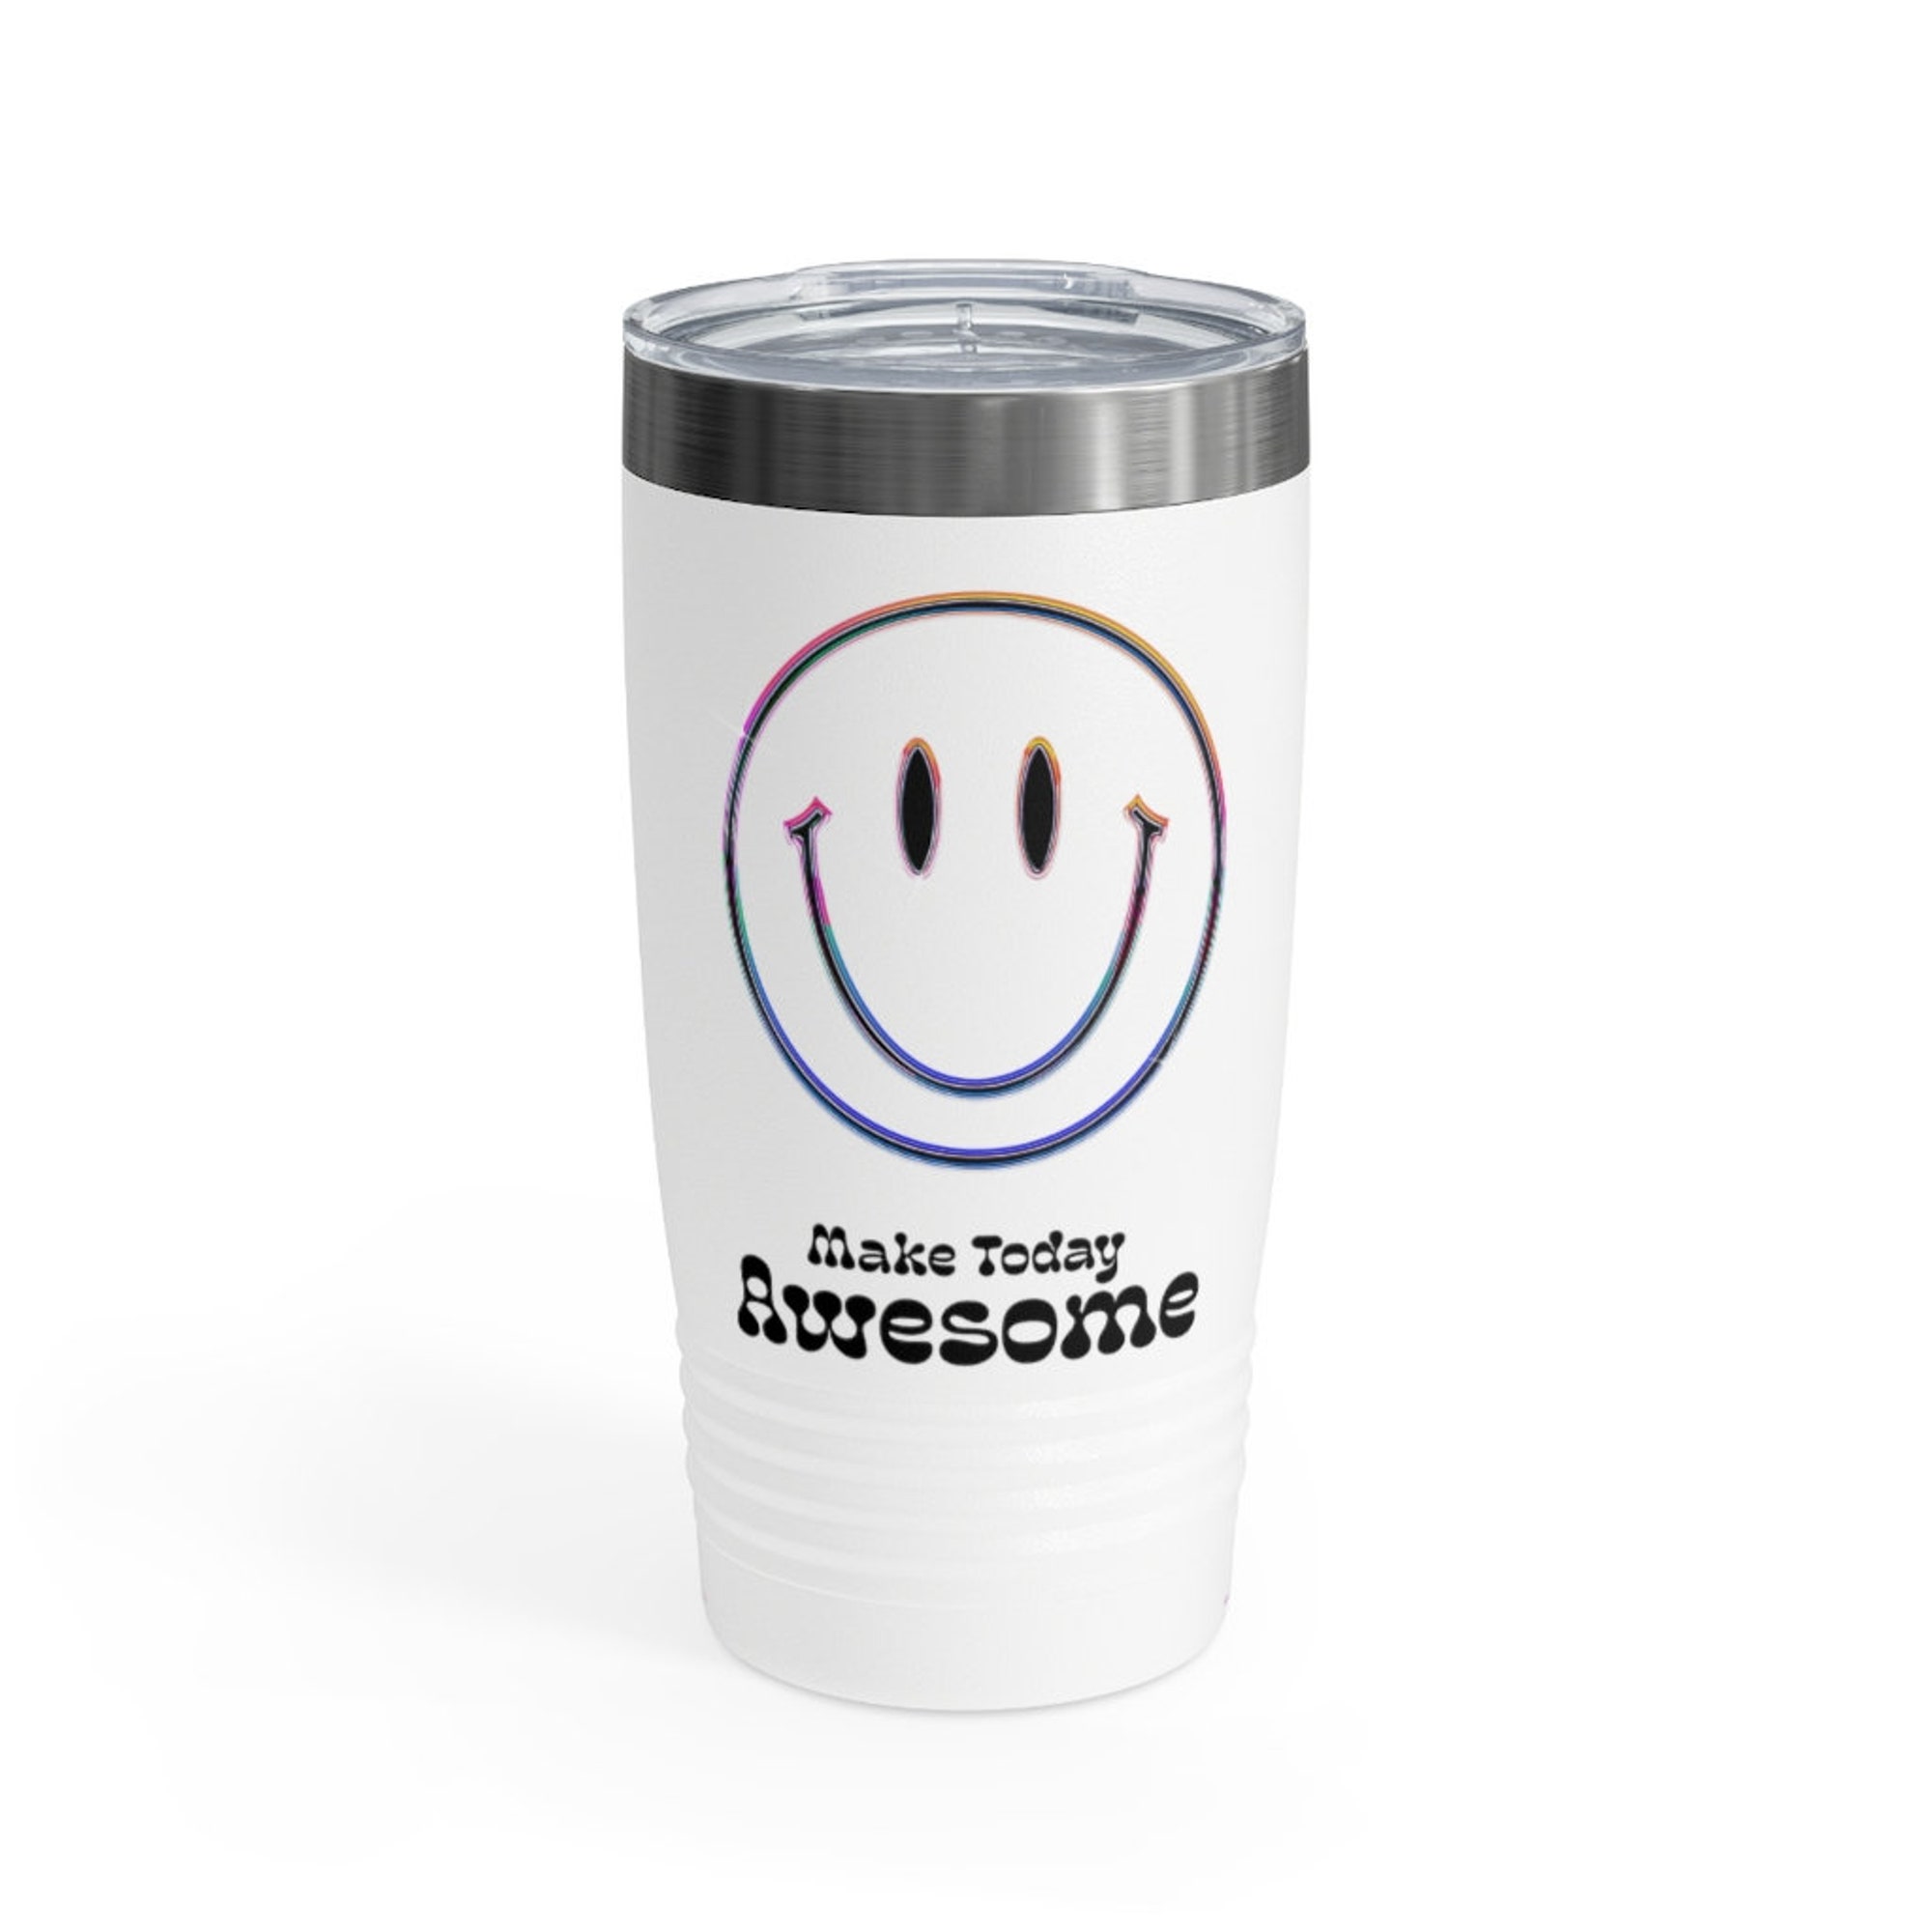 Discover Make Today Awesome Ringneck Tumbler